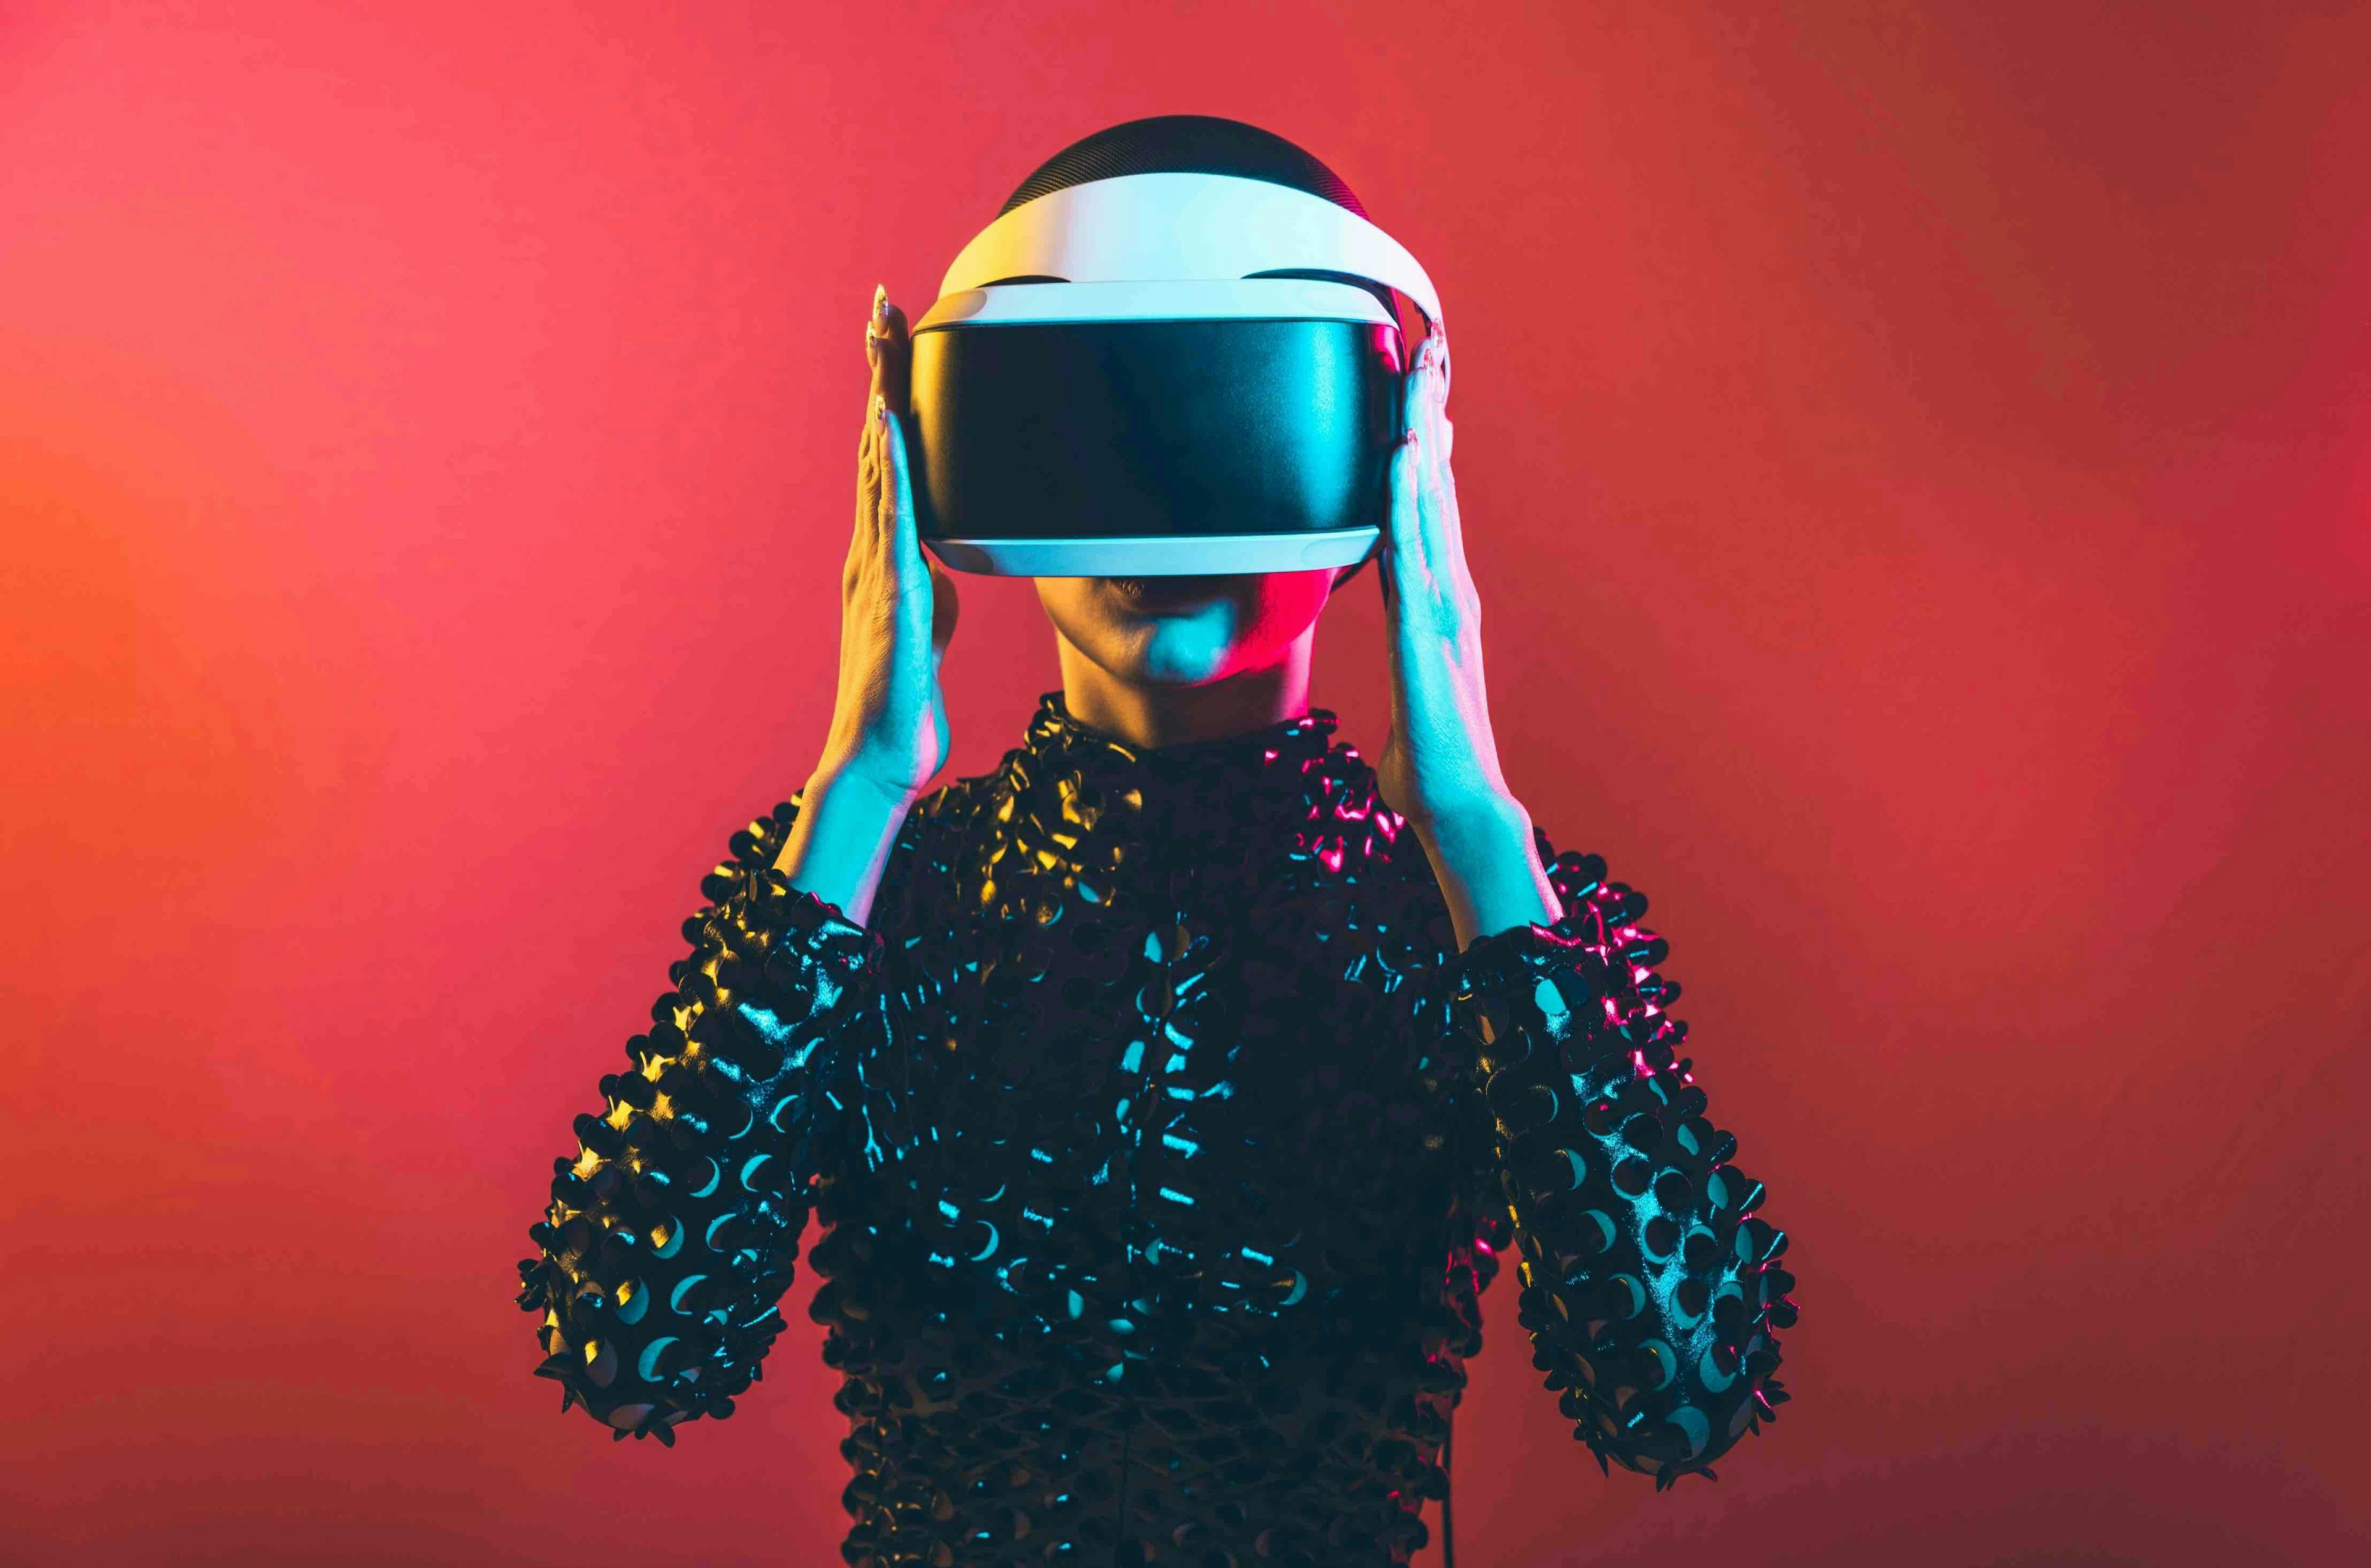 beauty,dj,headphones,cyberpunk,beautiful,music,club,model,dance,energy,nightclub,night,rave,girl,fashionable,visor,goggles,light,punk,reality,colorful,party,cosplay,pink,virtual,woman,color,disco,pin-up,shaved,head,pop,metaverse,hair,futuristic,influencer,electronic,bald,art,neon,retro,avatar,technology,cosplayer,portrait,people,lifestyle,fun,fashion photography vr headset head person face portrait